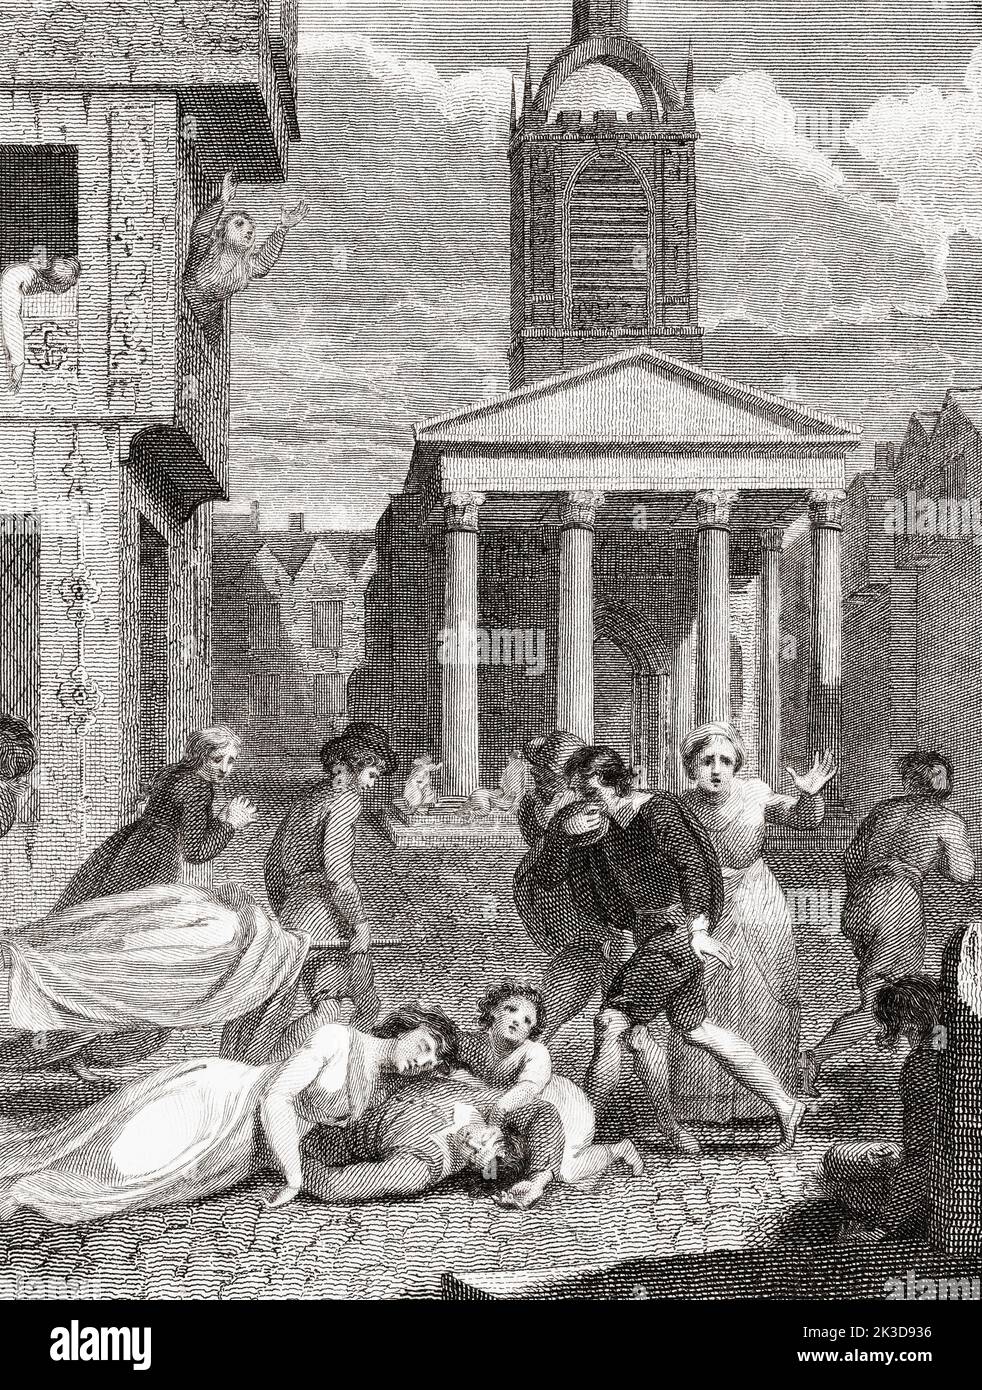 The Fatal Effect of the Plague of 1665.  After an engraving by English artist Robert Smirke.  Figures suggest as many as 100,000 people - a quarter of London's population - died during the 18 months the plague raged in the capital. Stock Photo